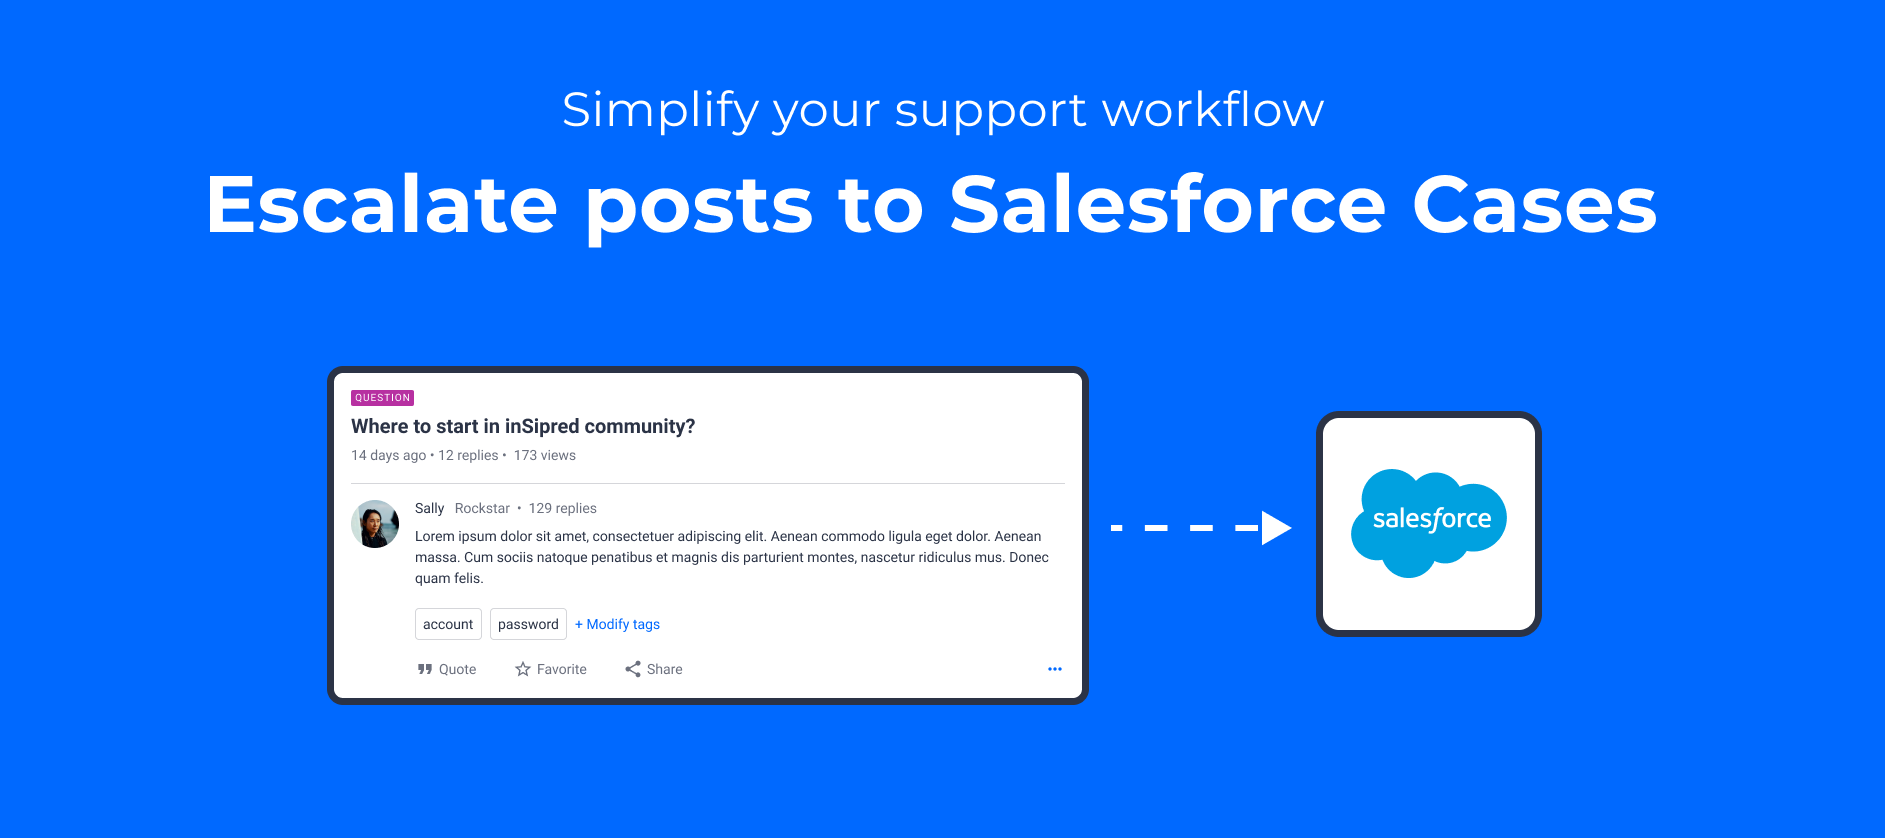 Simplify your support workflow: escalate community posts to Cases in Salesforce 🤖